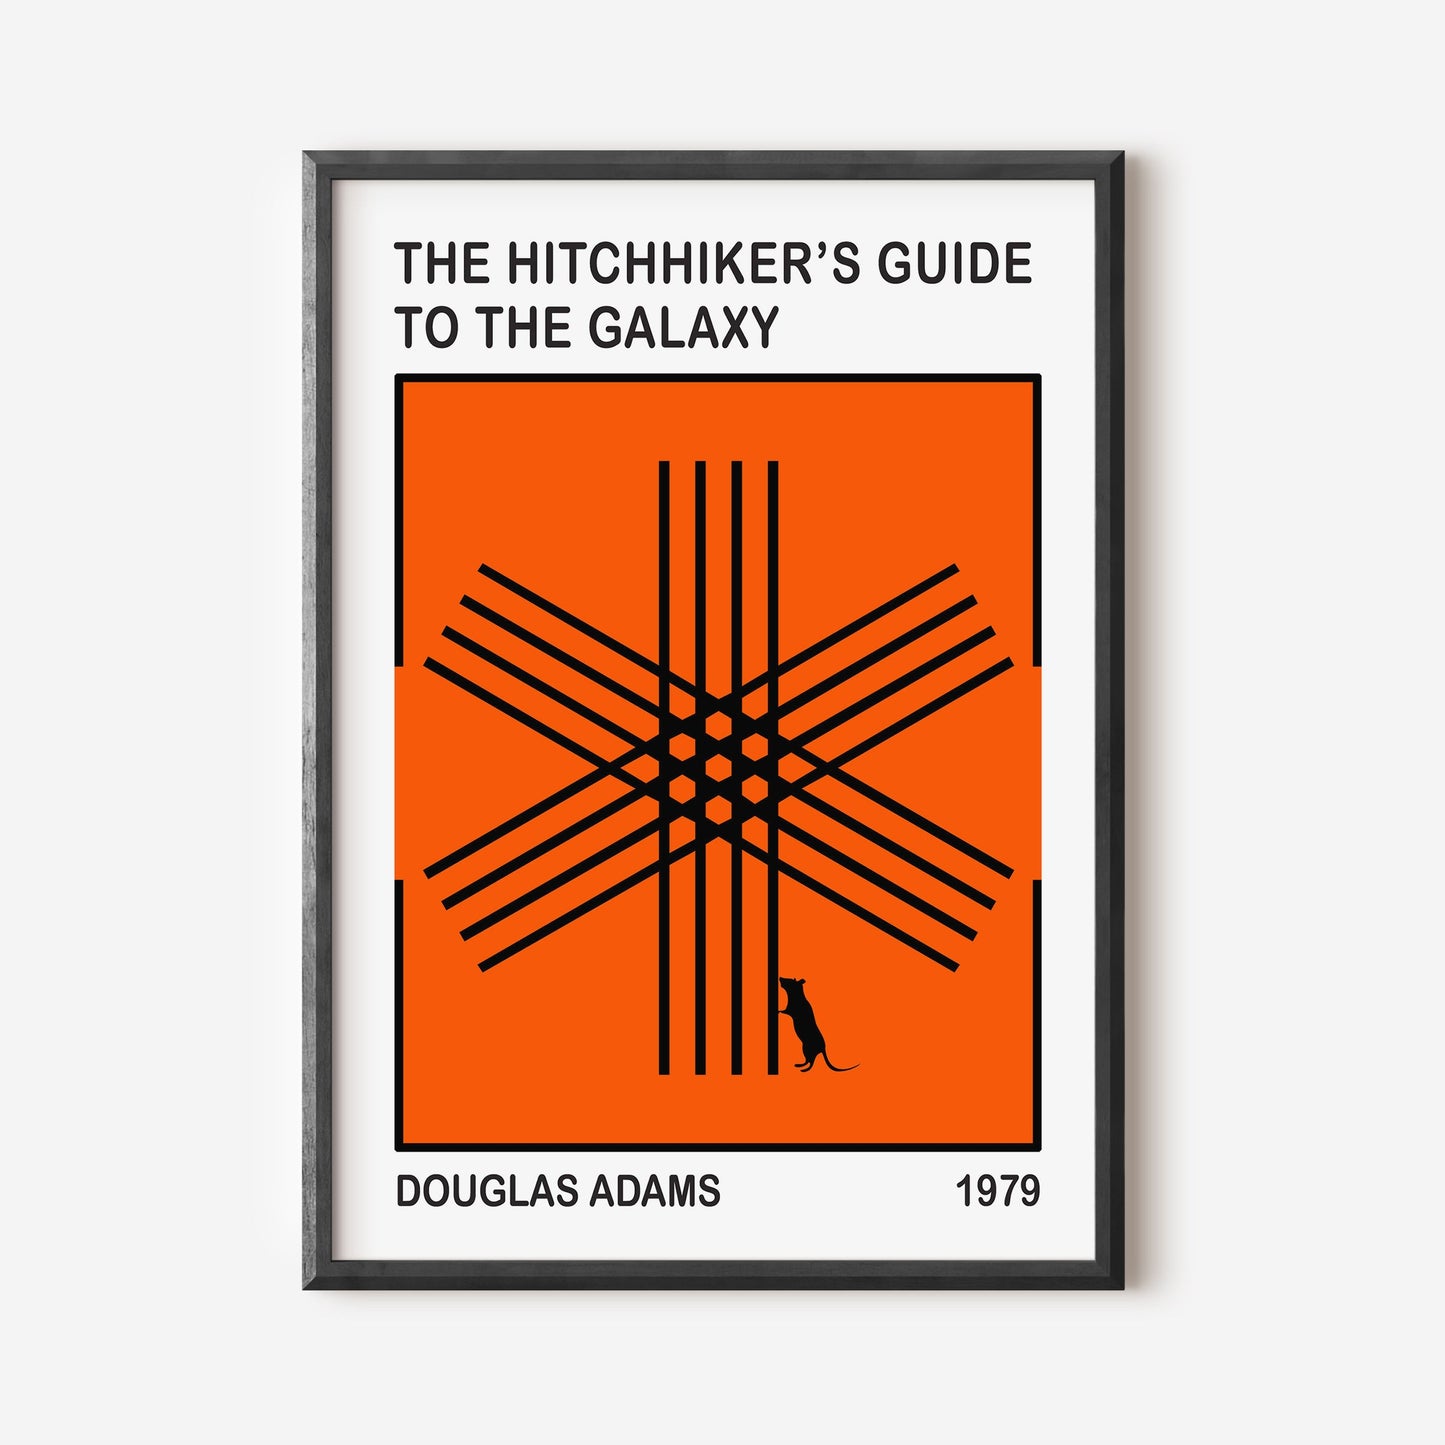 Number 42/100 - Limited Edtion - The Hitchhiker's Guide to the Galaxy// "Asterix & Mouse" ORANGE